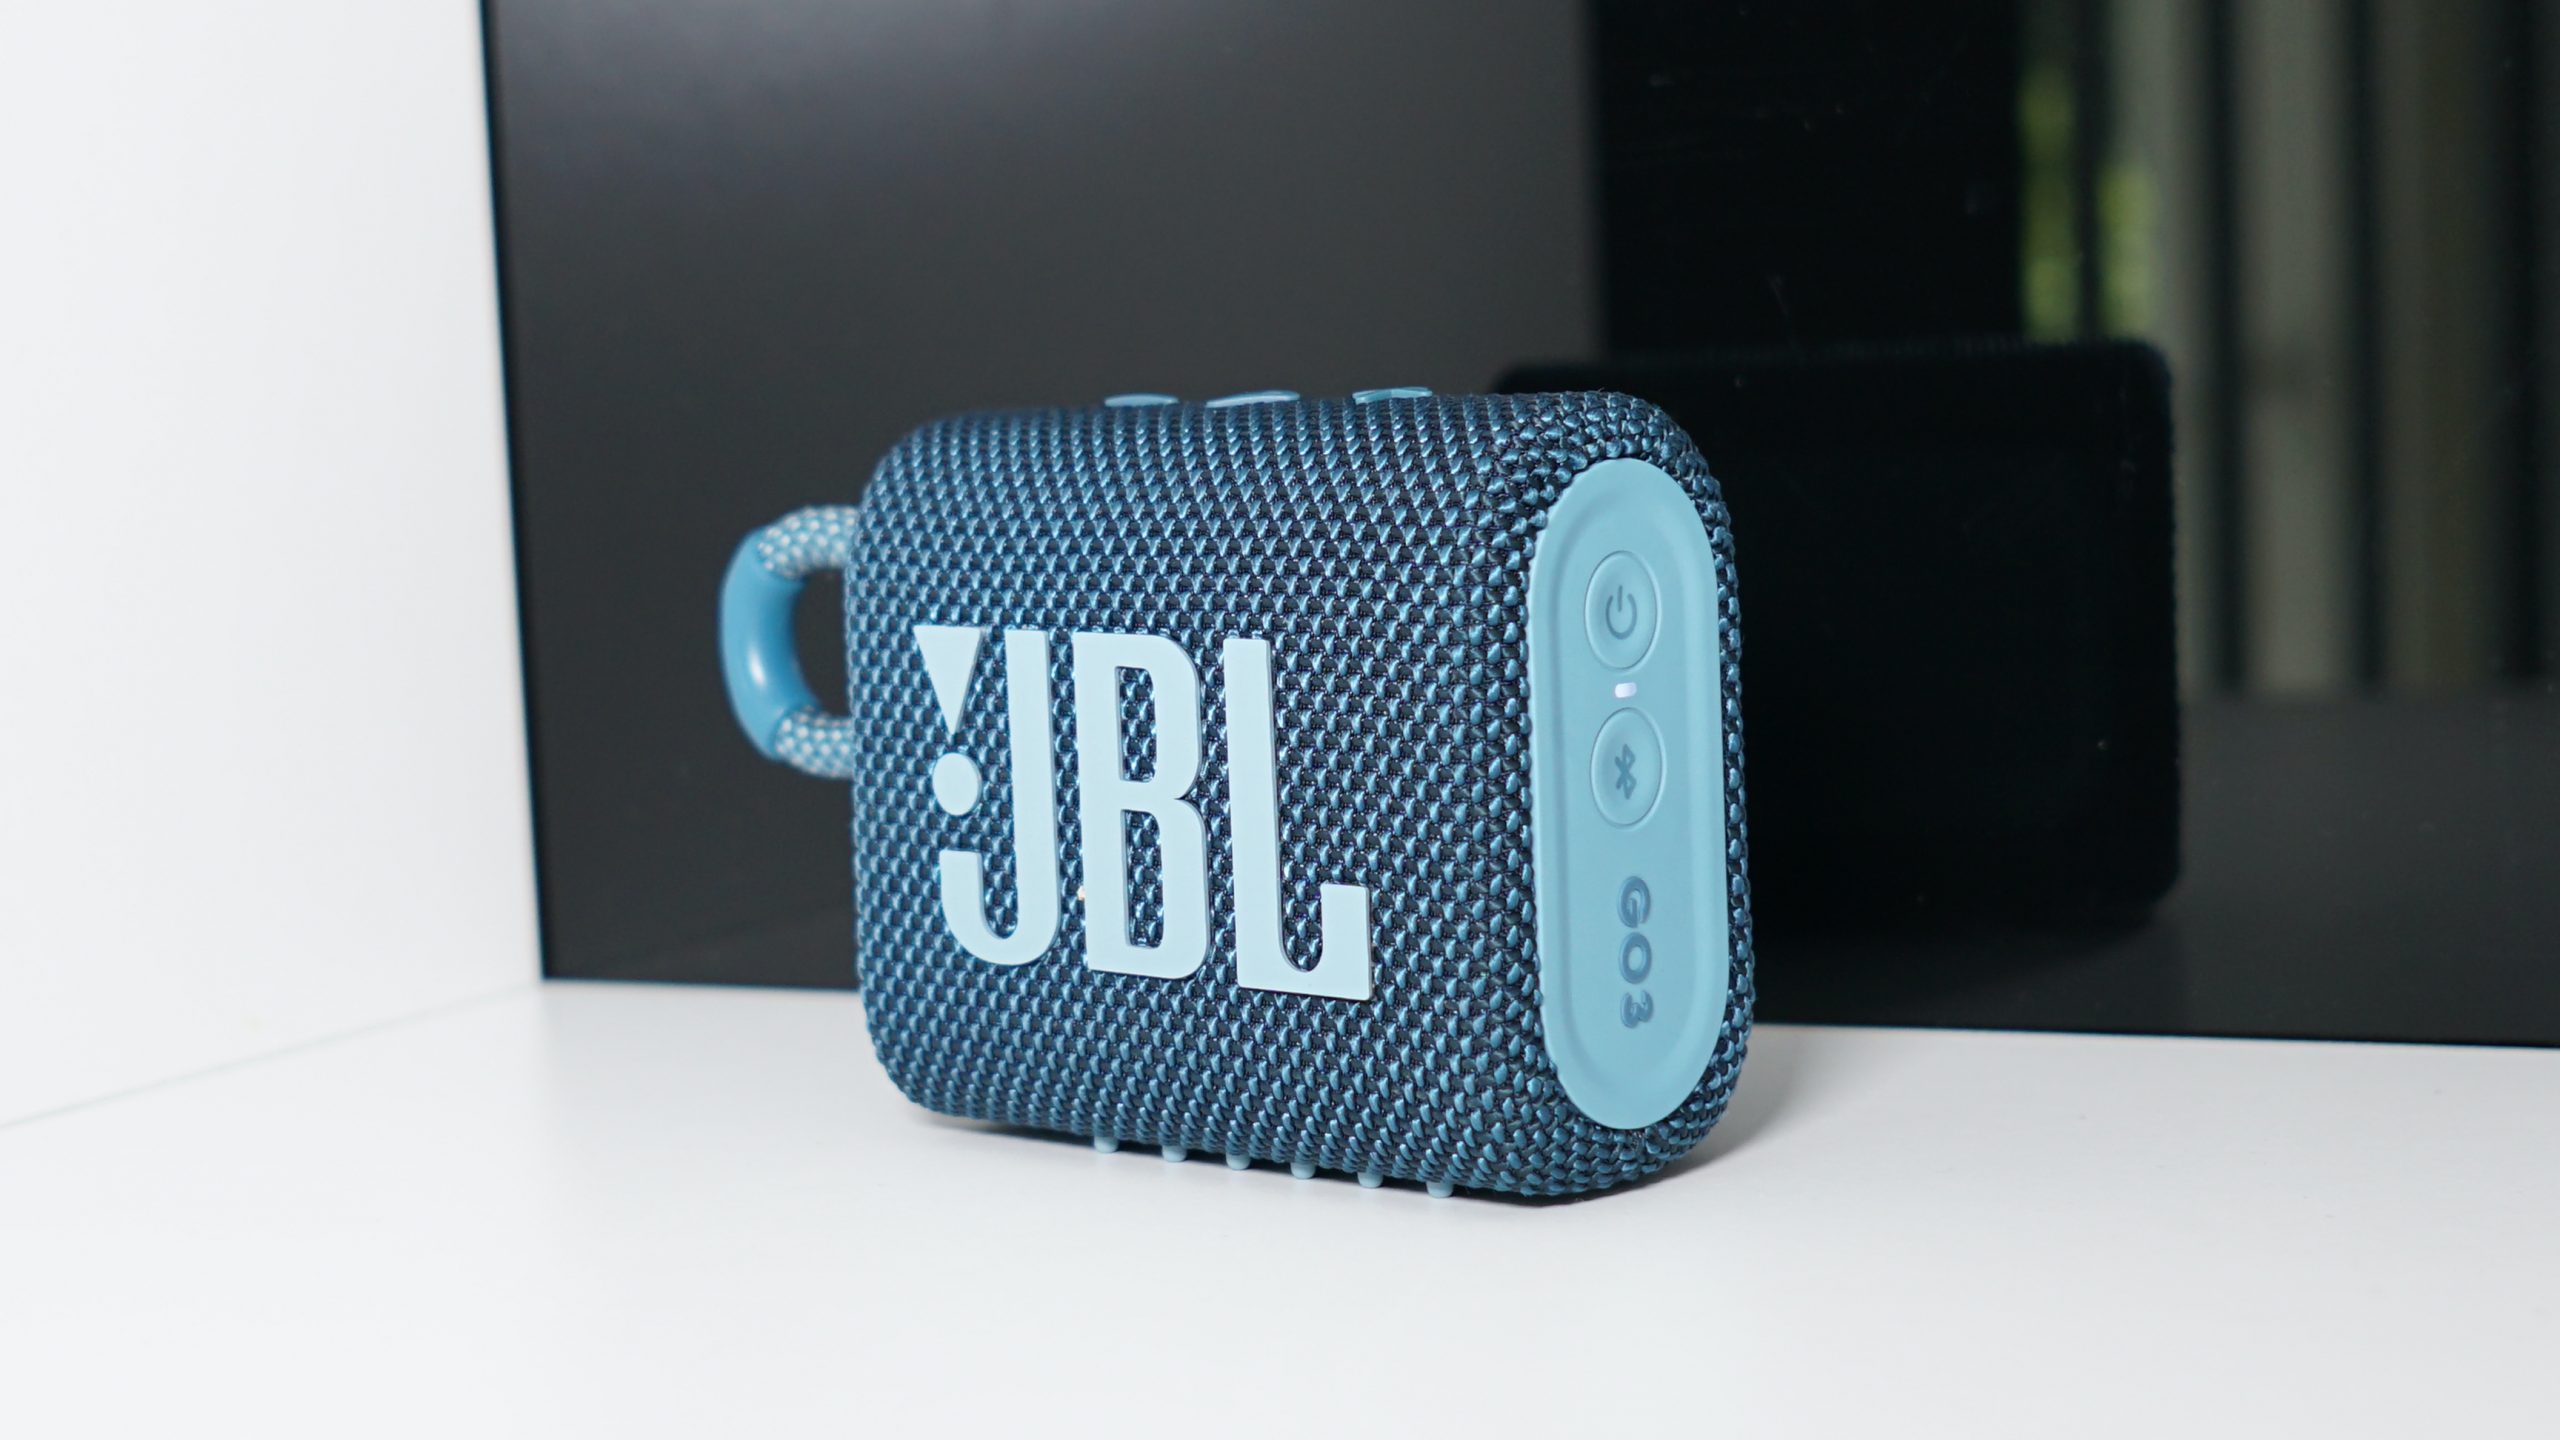 Jbl Go Black Photos and Images